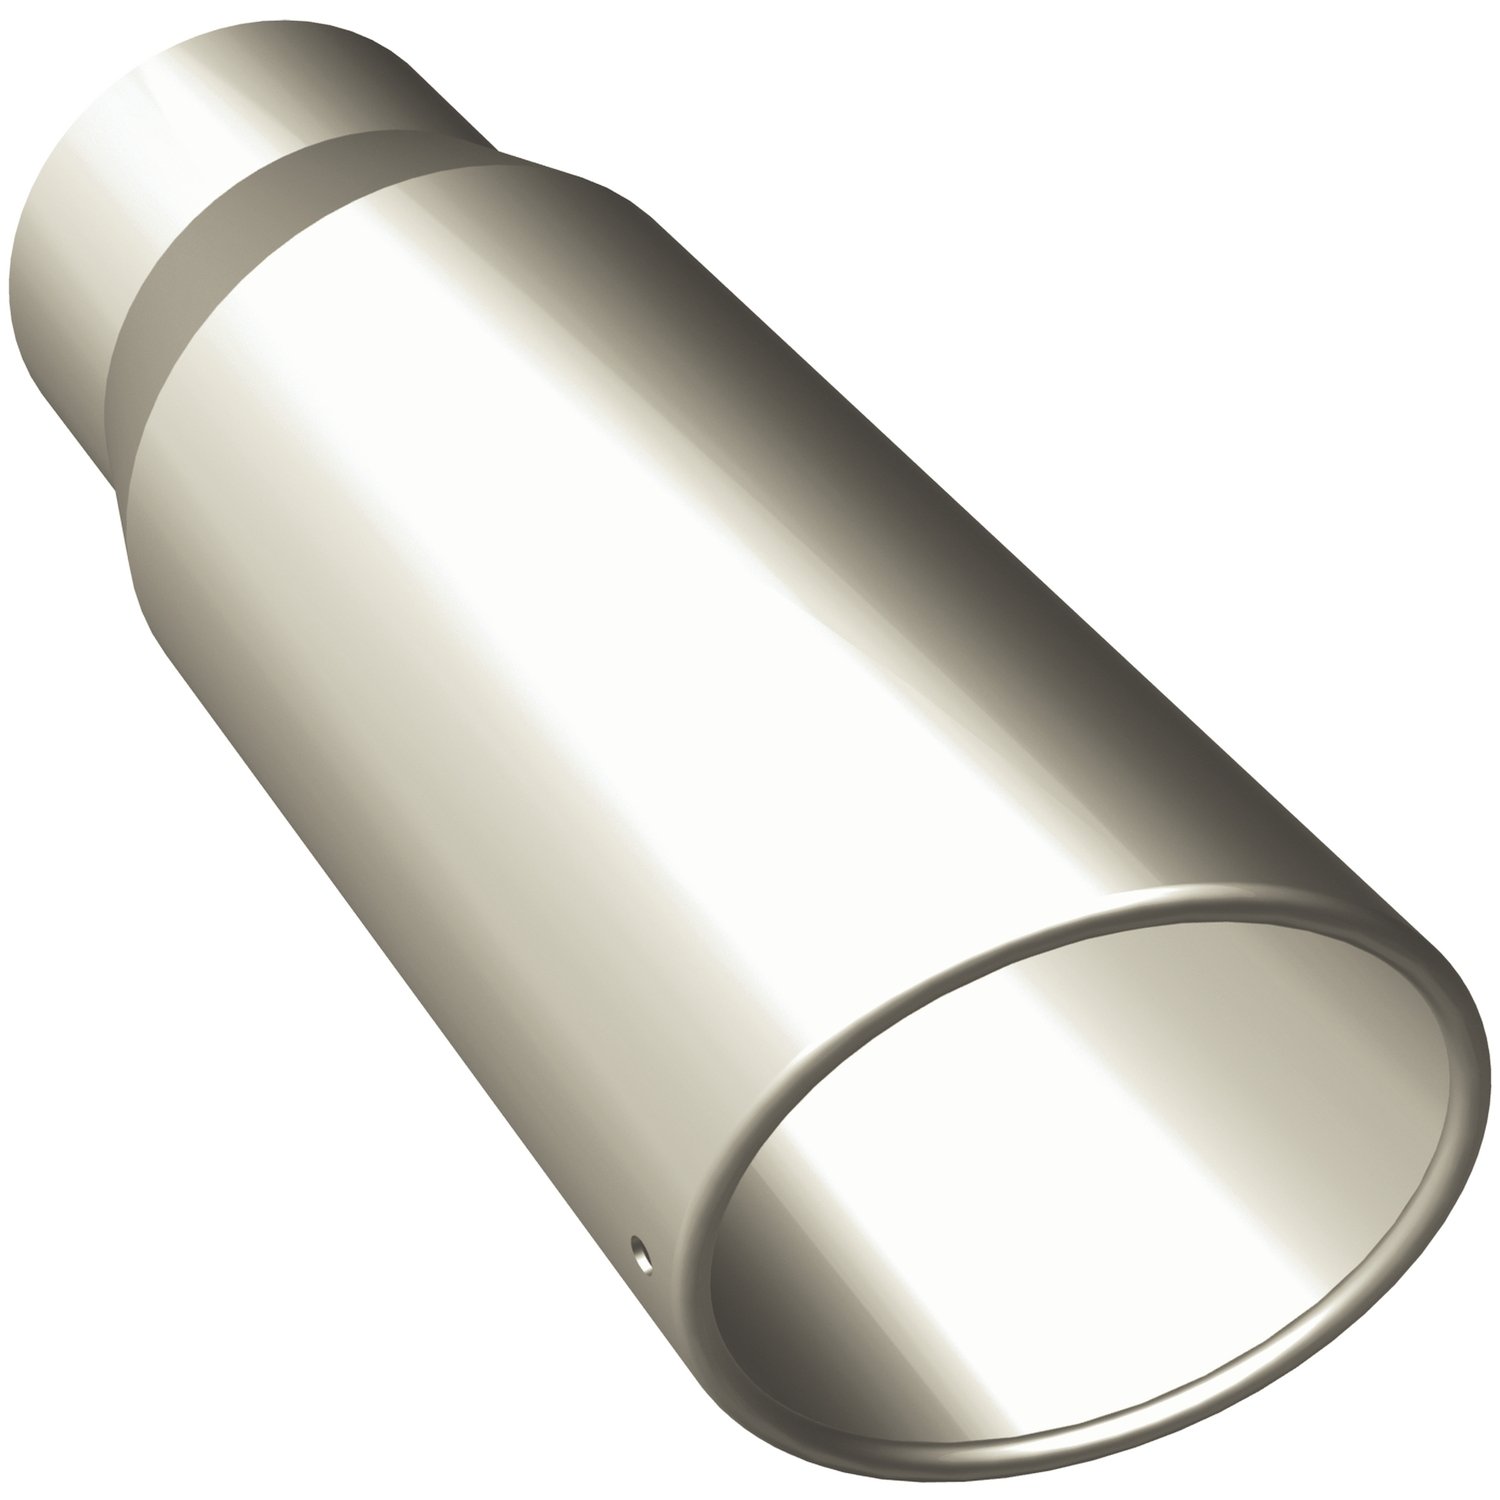 Polished Stainless Steel Weld-On Single Exhaust Tip Inlet Inside Diameter: 4"